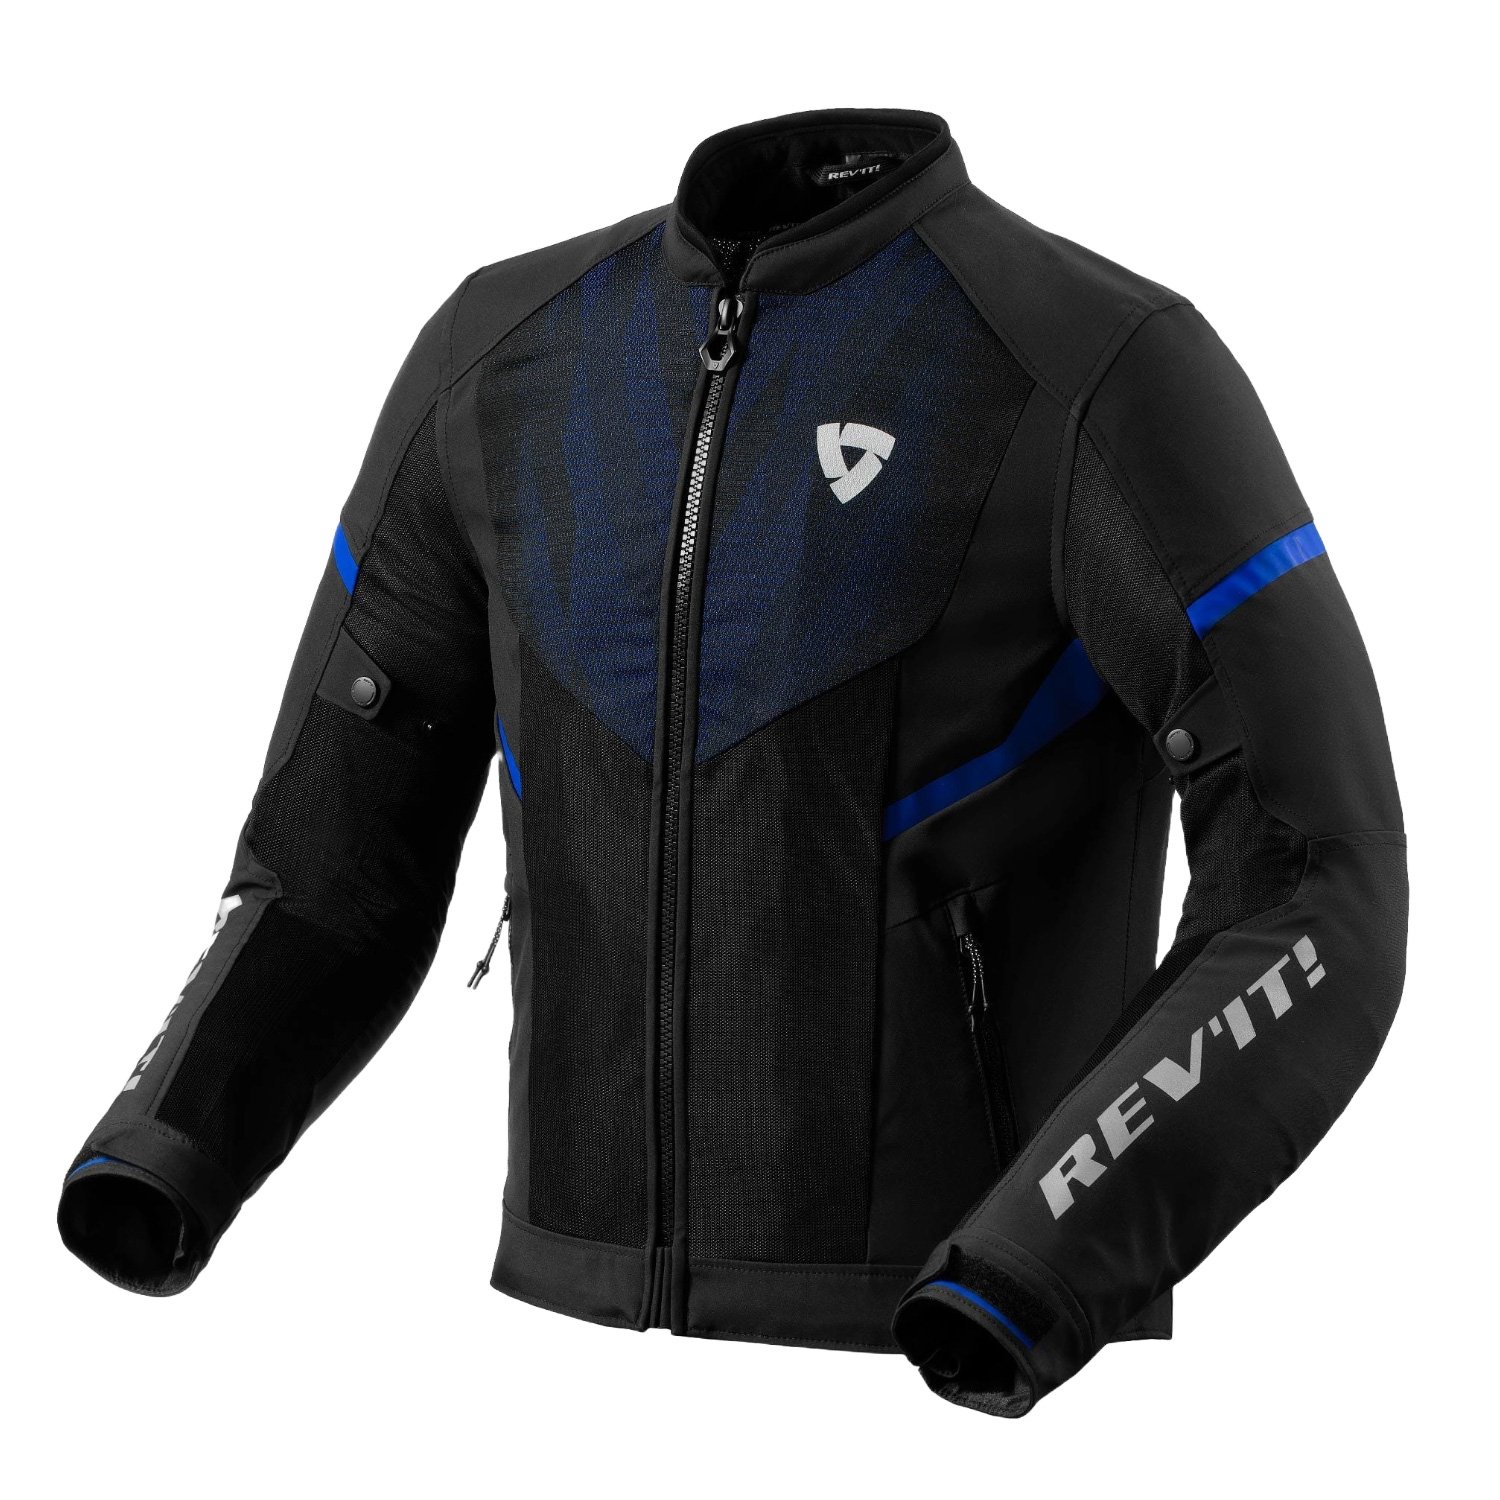 Image of REV'IT! Hyperspeed 2 GT Air Jacket Black Blue Size 3XL ID 8700001367578